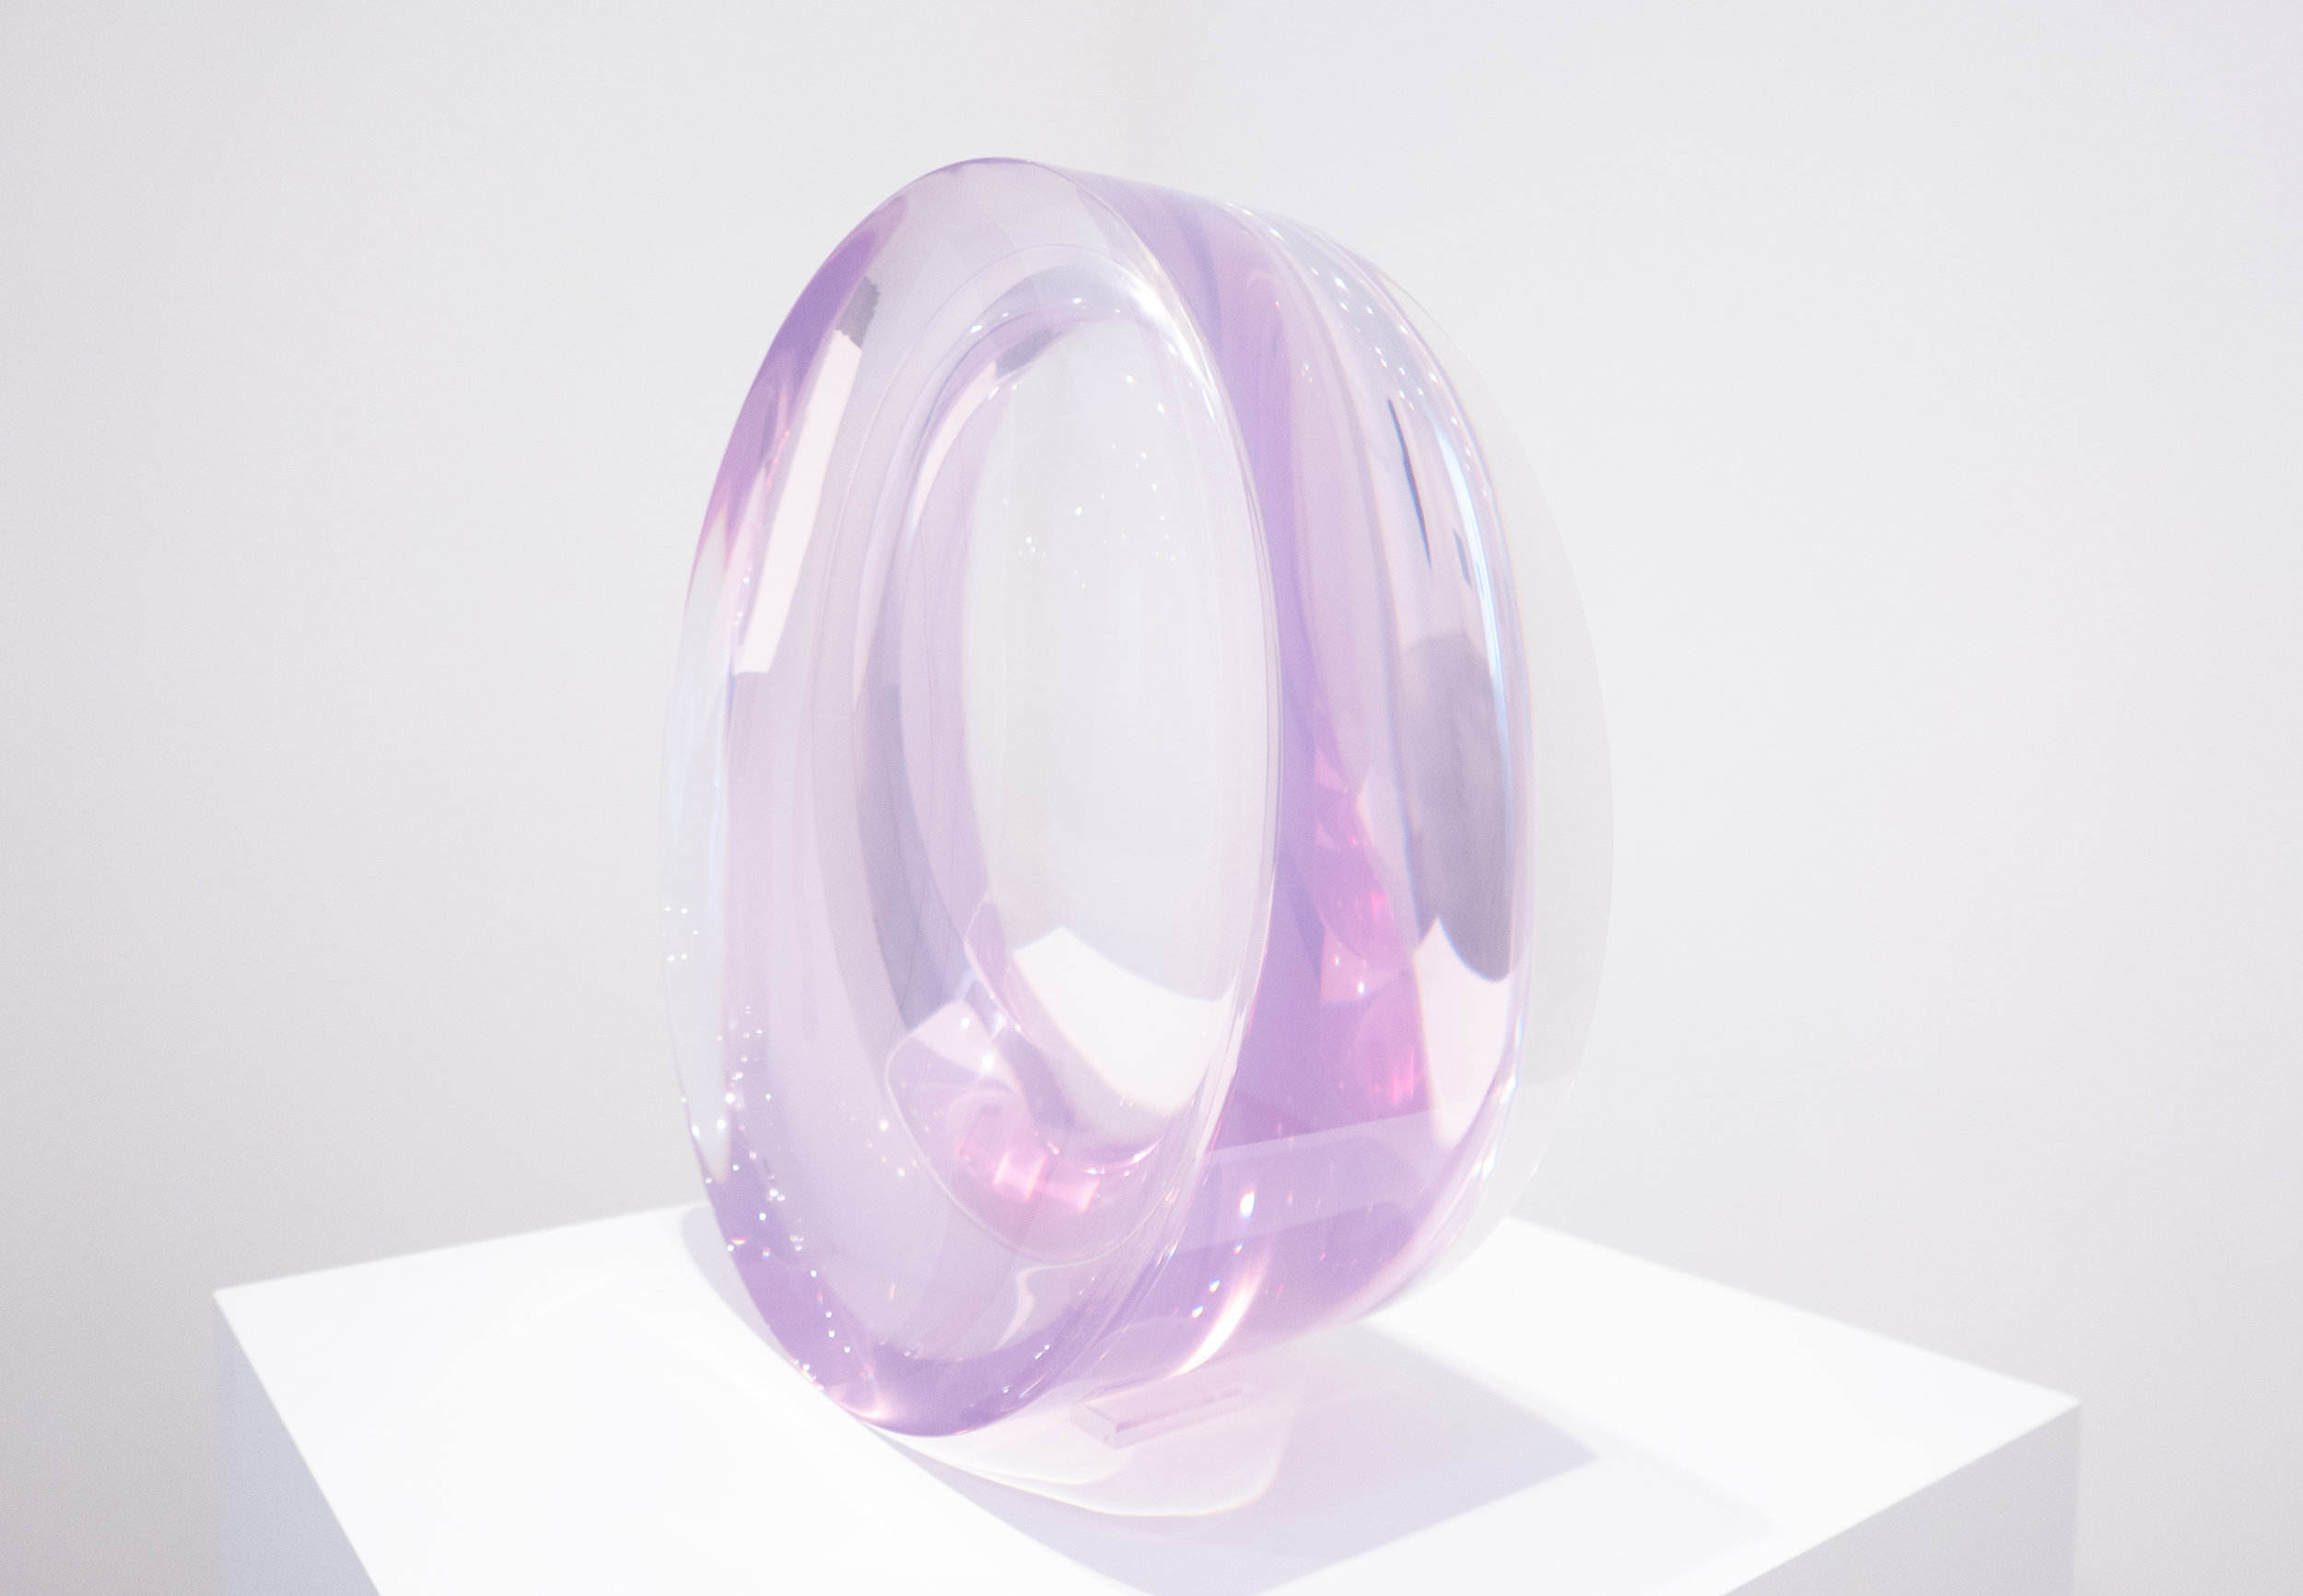  Dewain Valentine Concave Circle Rose 1968 - 2014 Cast Polyester Resin 24 x 24 x 9 inches 